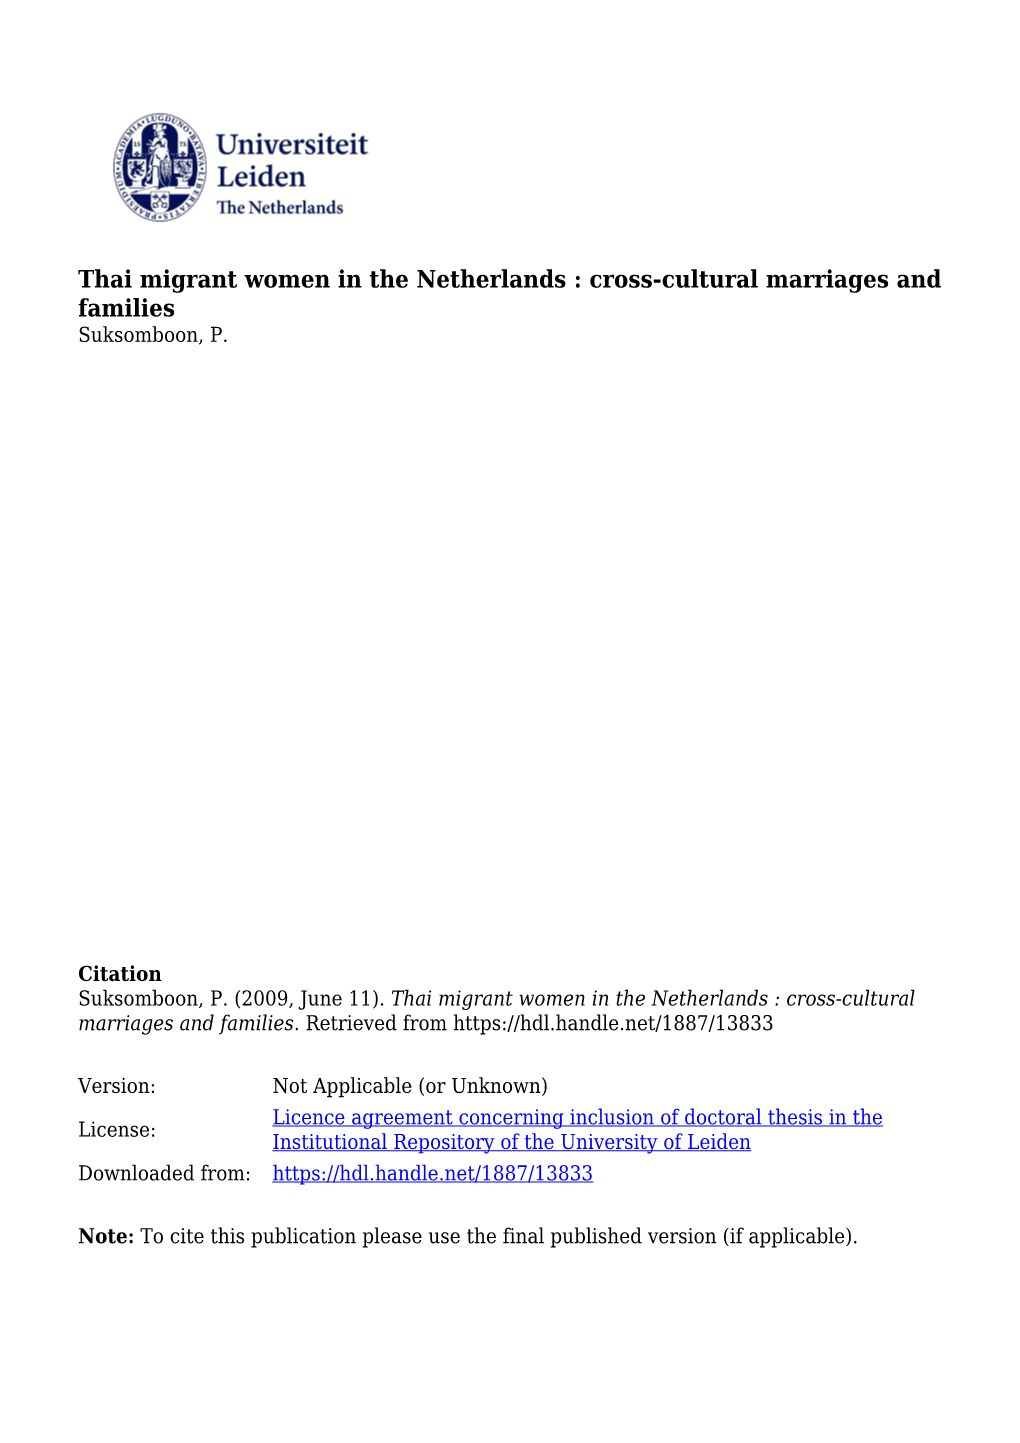 Thai Migrant Women in the Netherlands : Cross-Cultural Marriages and Families Suksomboon, P